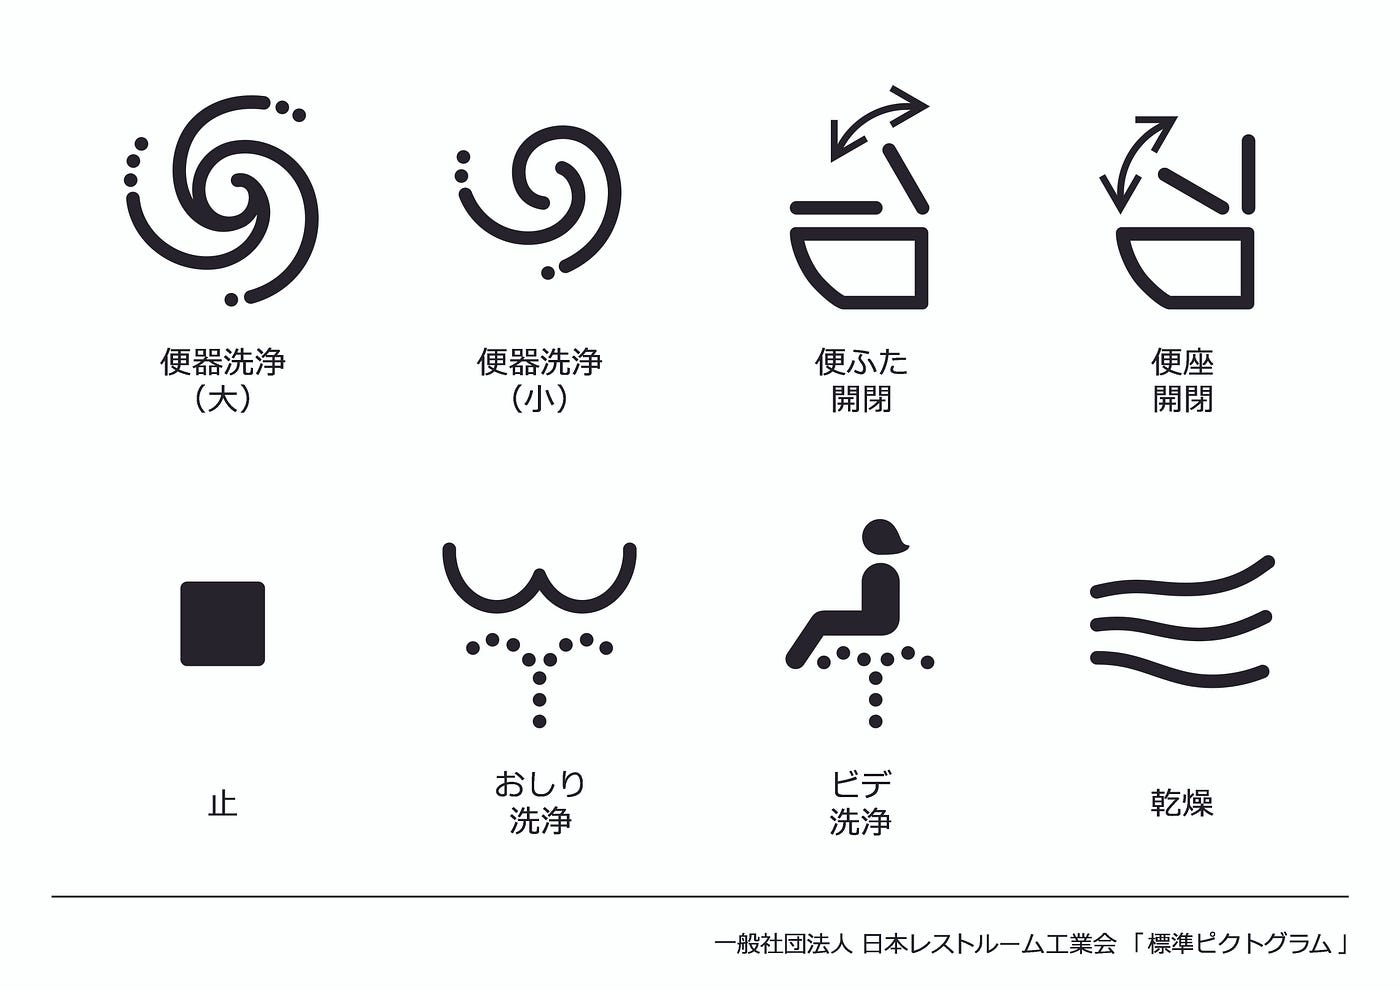 Japan's toilet makers put a lid on button confusion | by Daniel Hurst |  Medium